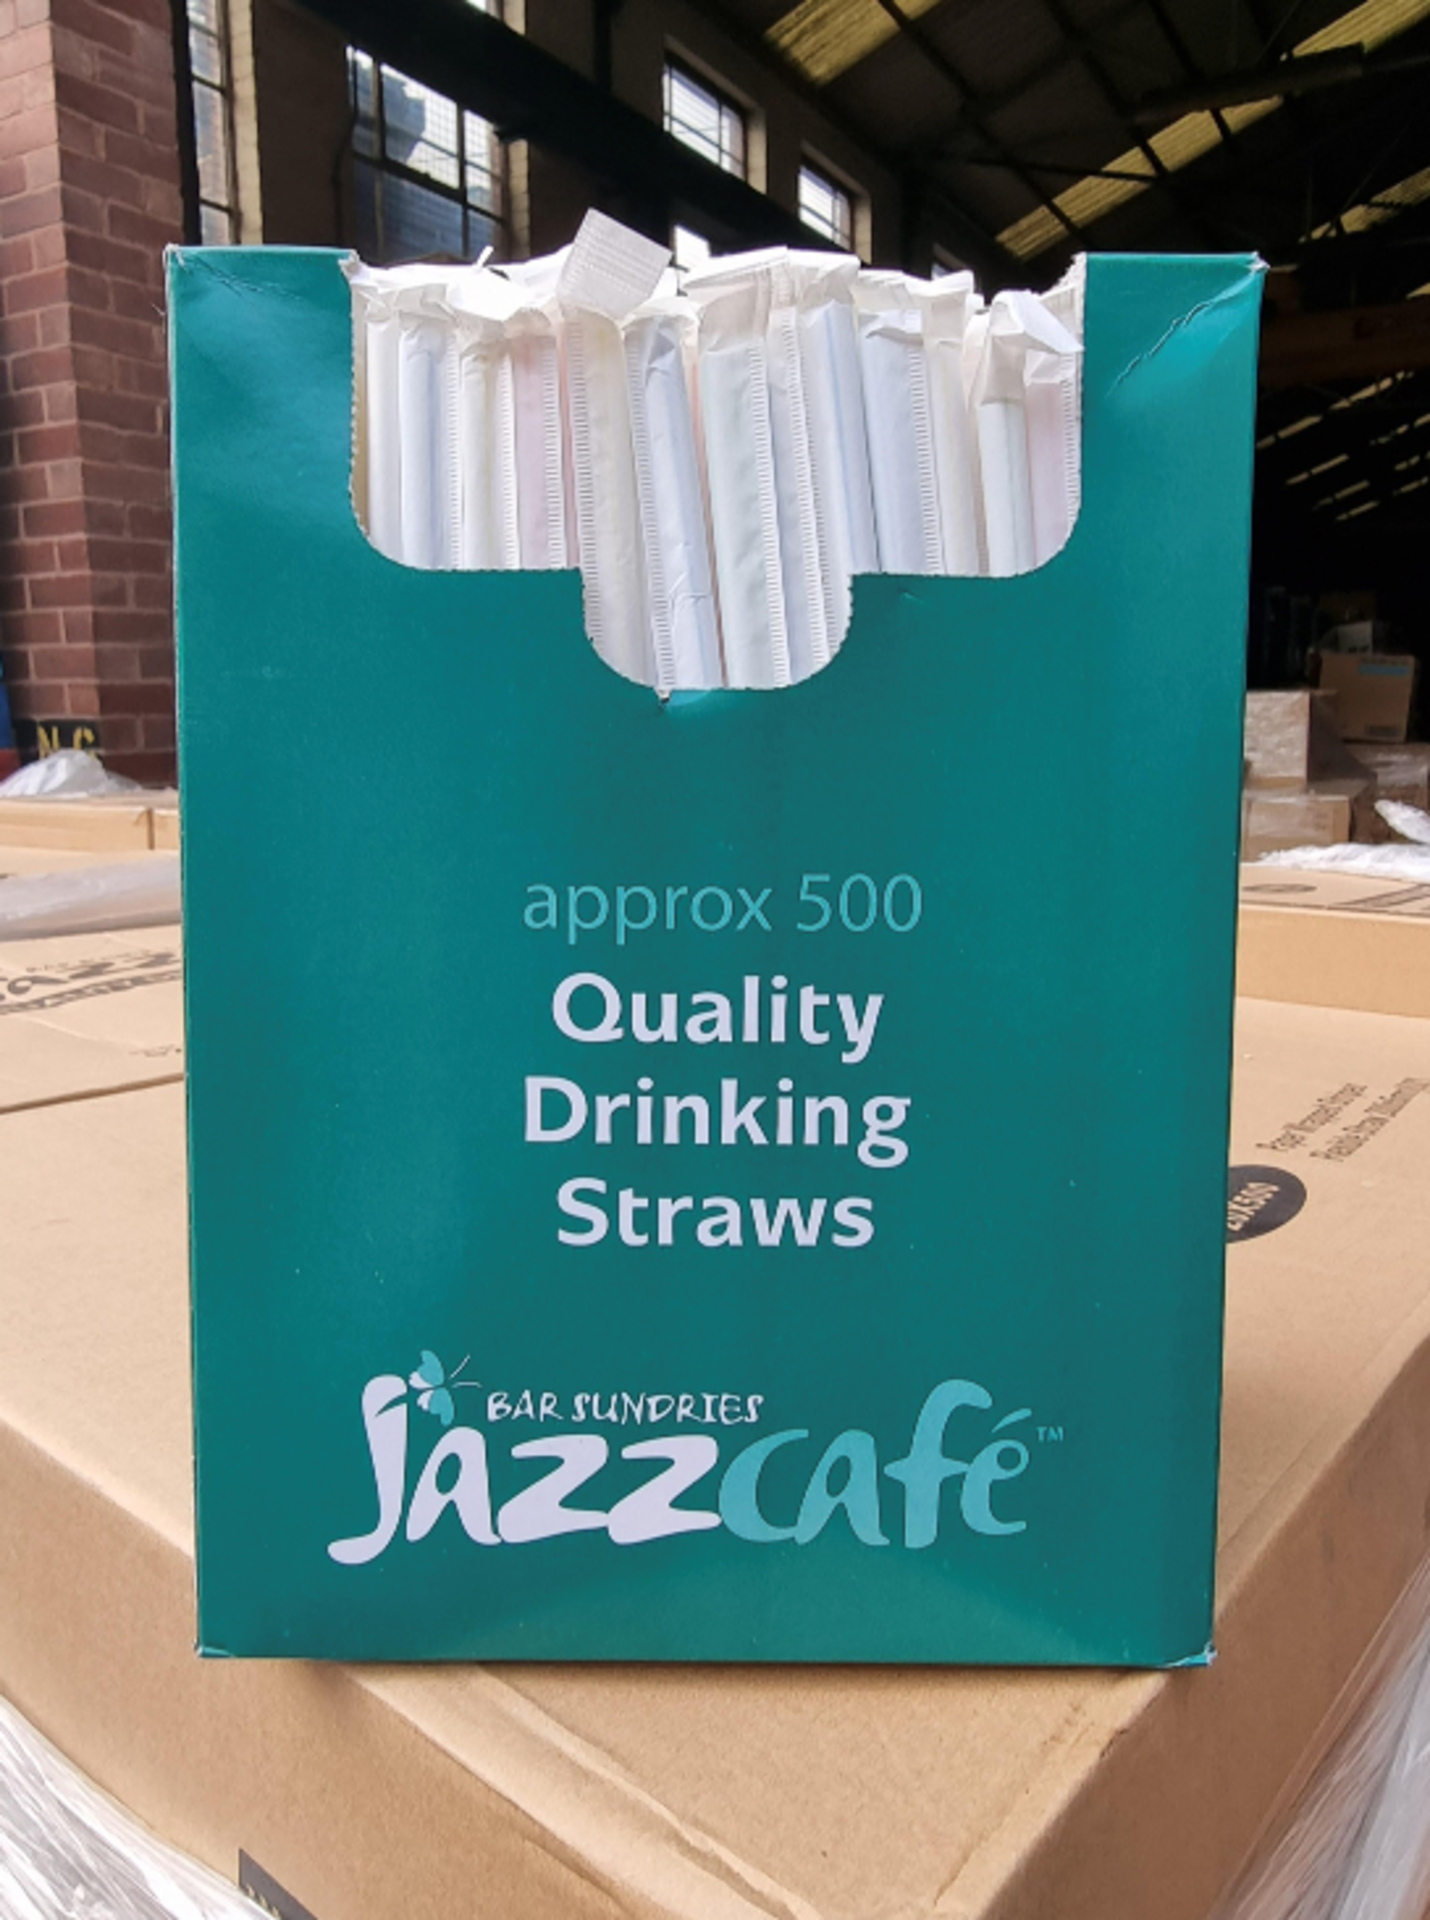 PALLET TO CONTAIN APROX. 120,000 x JAZZ CAFÉ INDIVIDUALLY WRAPPED BENDY PLASTIC QUALITY DRINKING